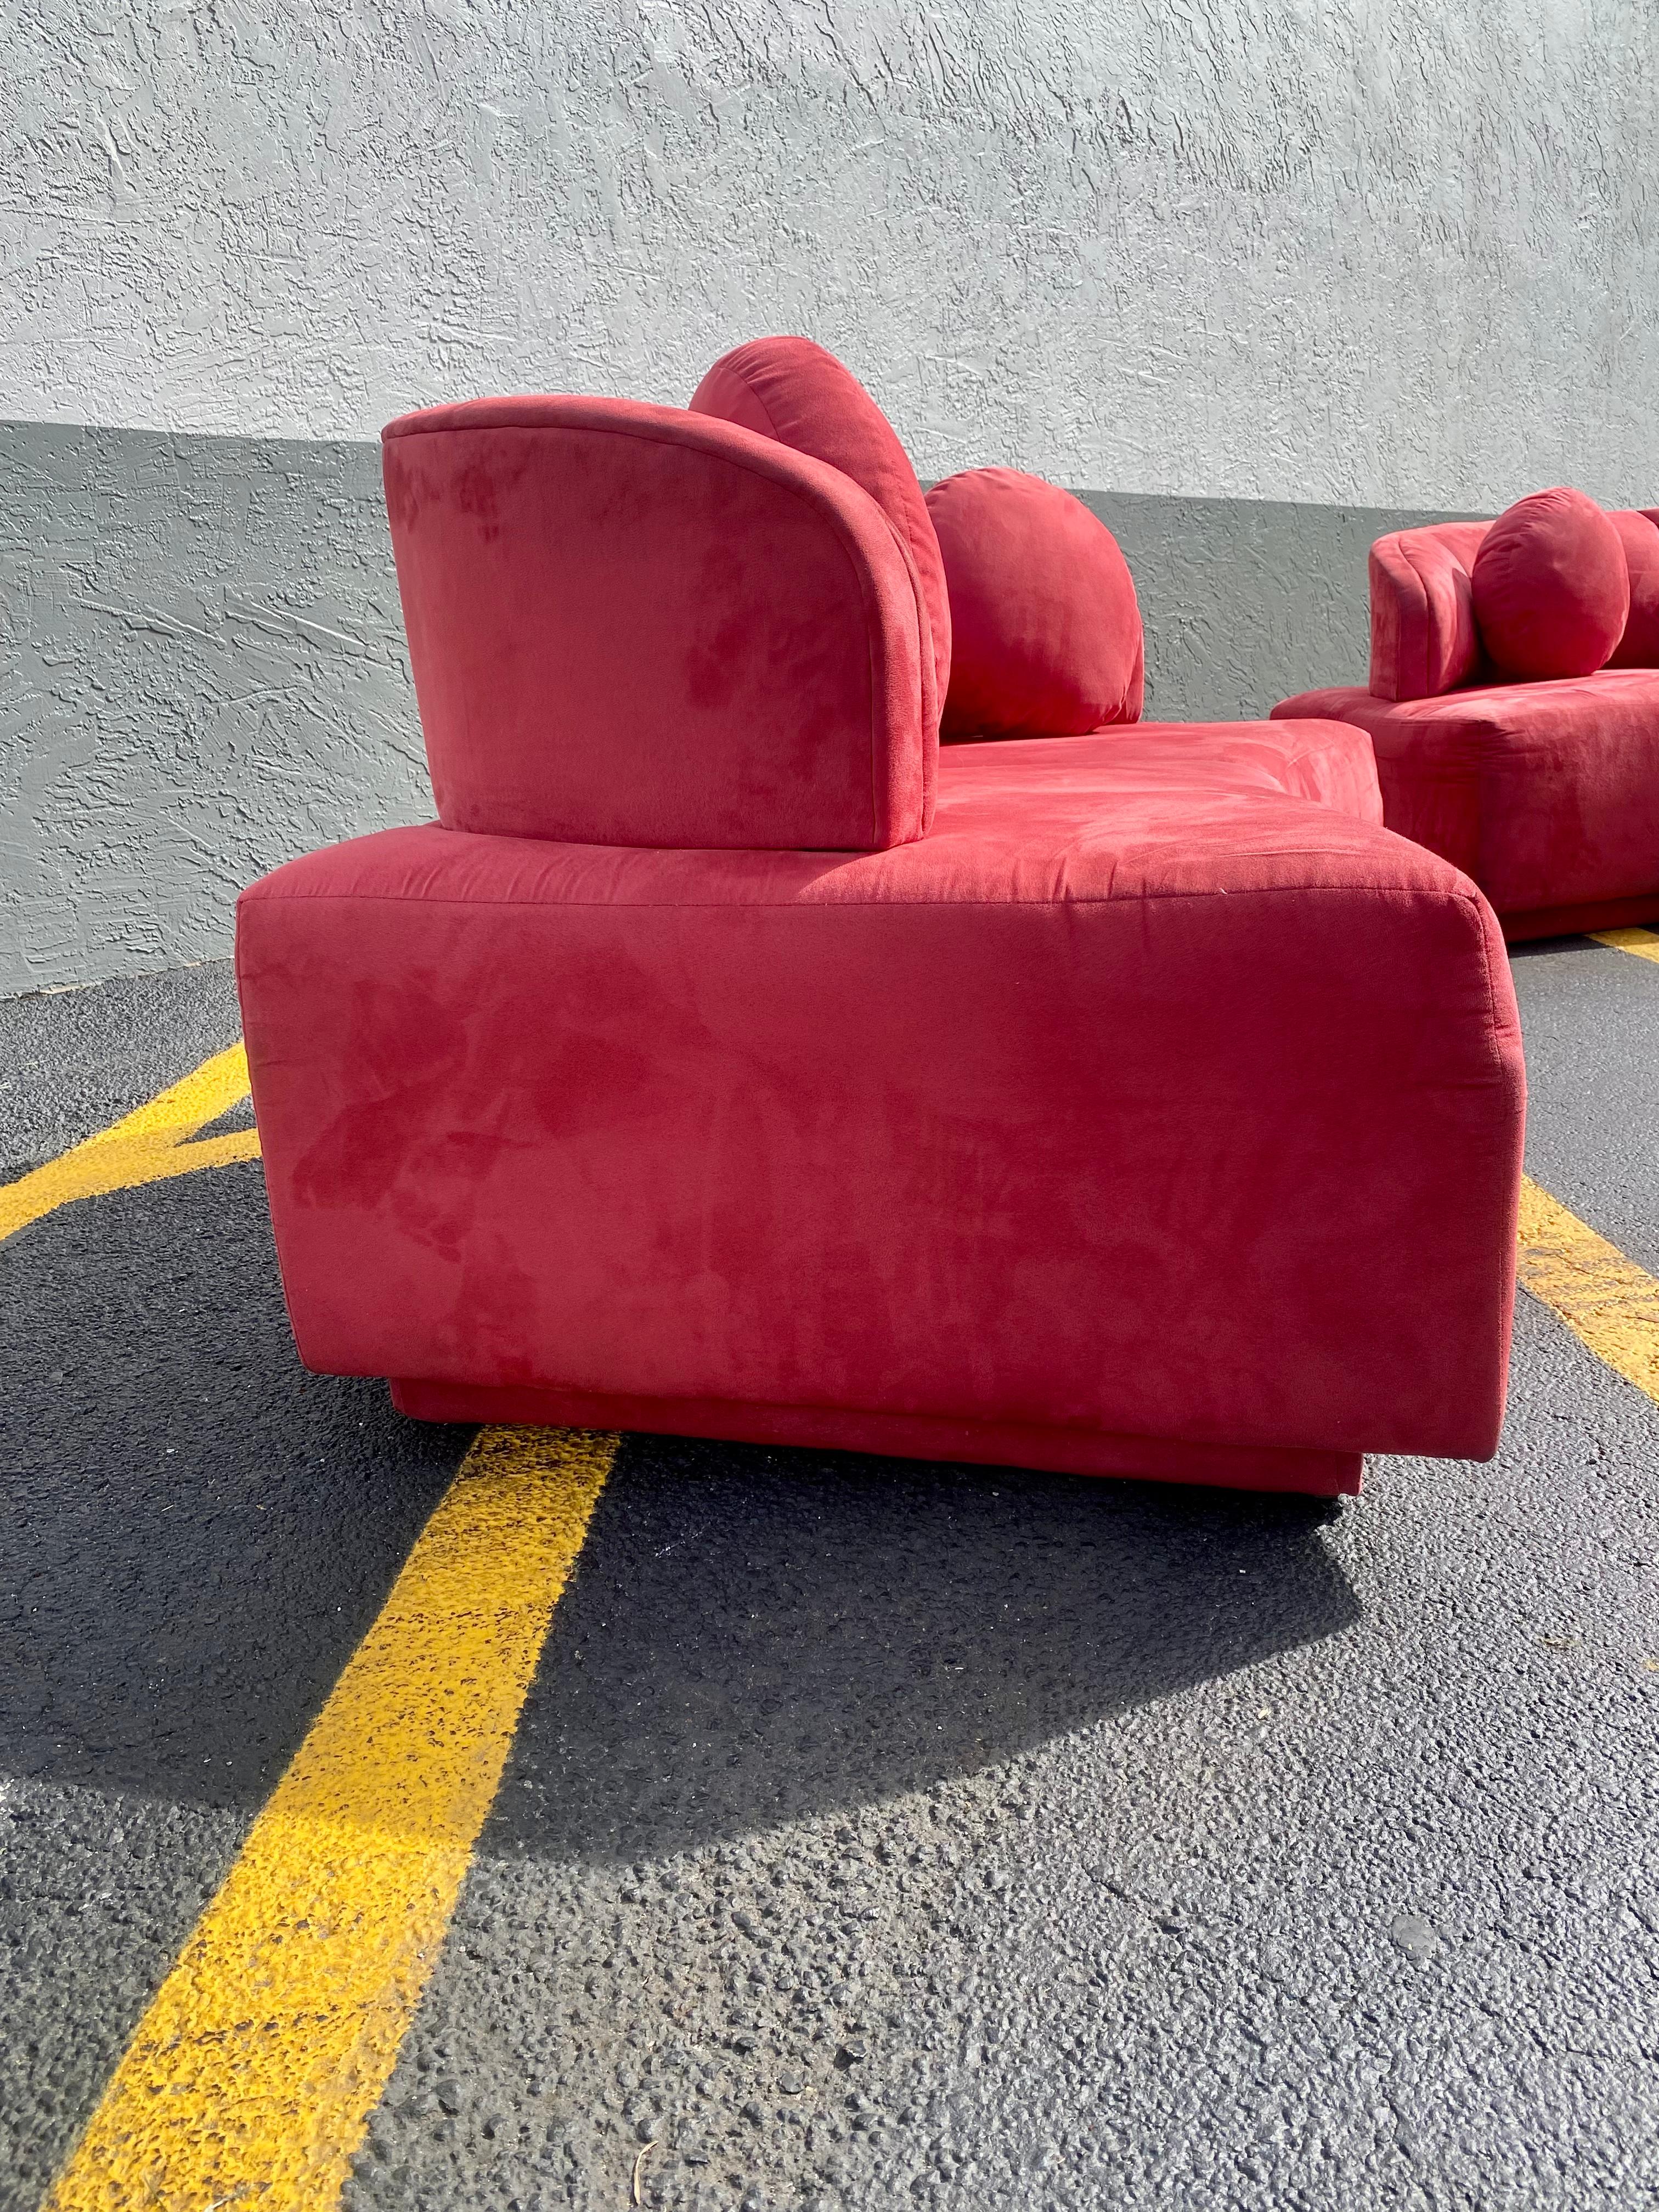 1980s Sculptural Weiman Red Cloud Sofa Loveseat, Set of 2 For Sale 2